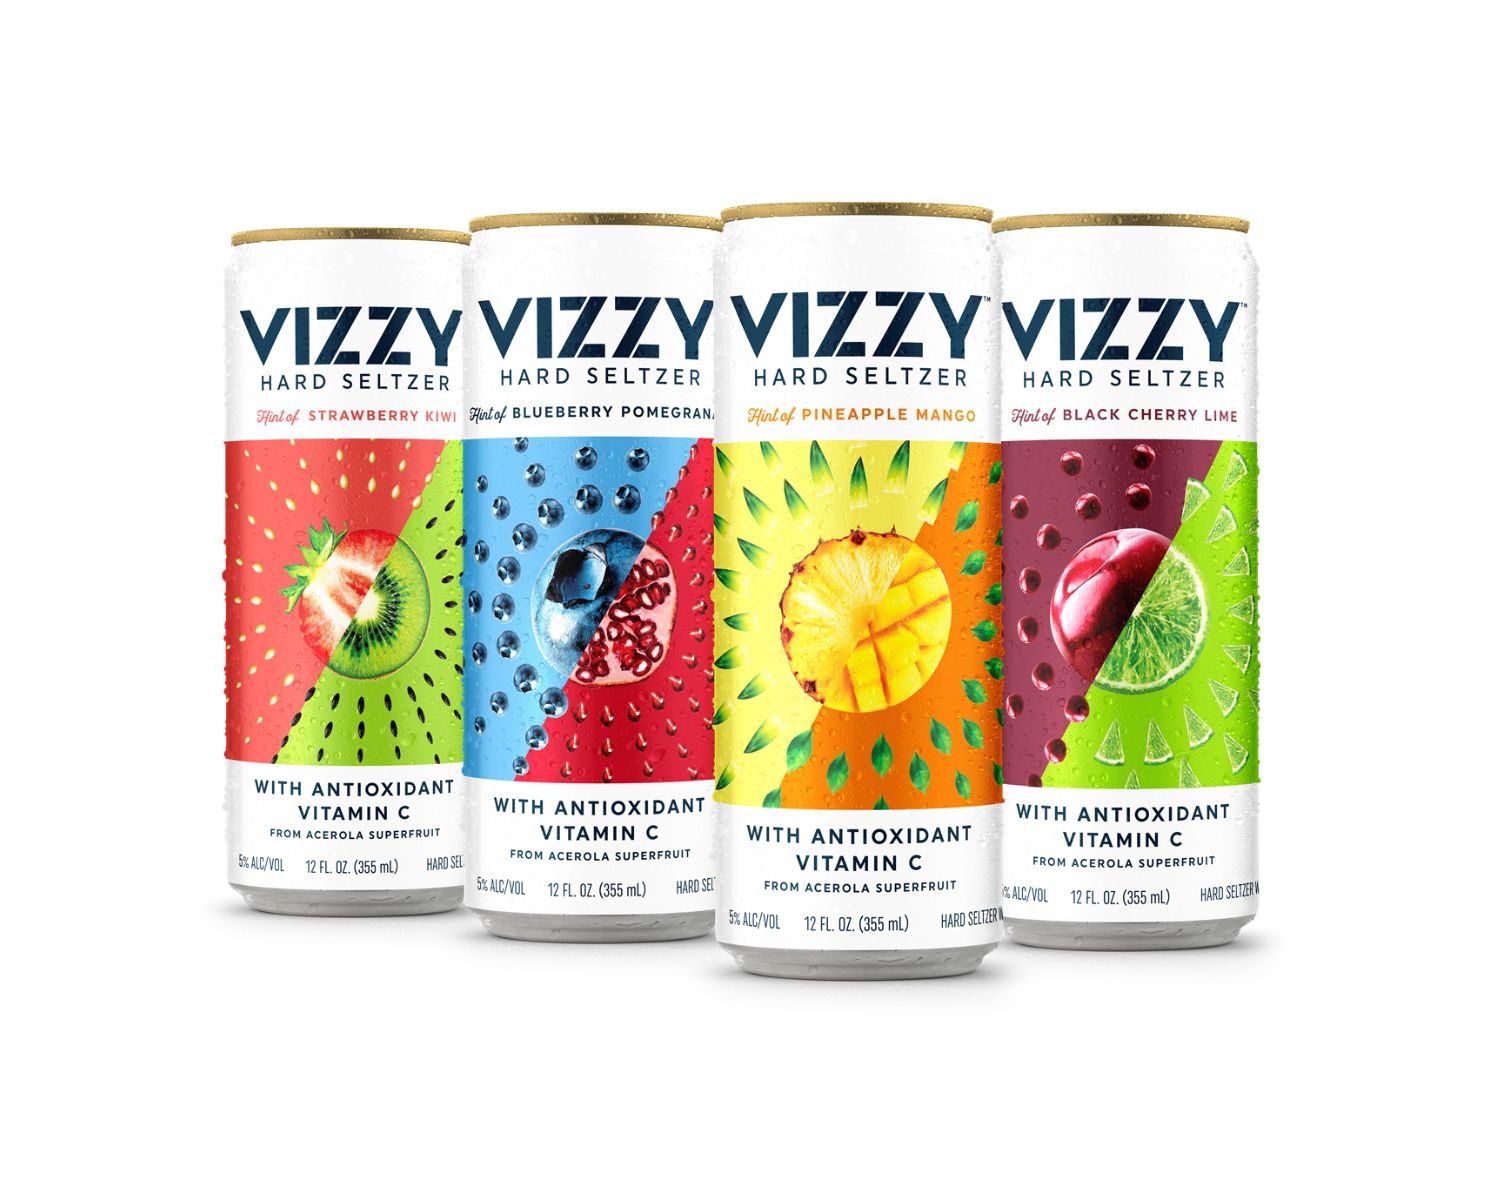 18-vizzy-nutrition-facts